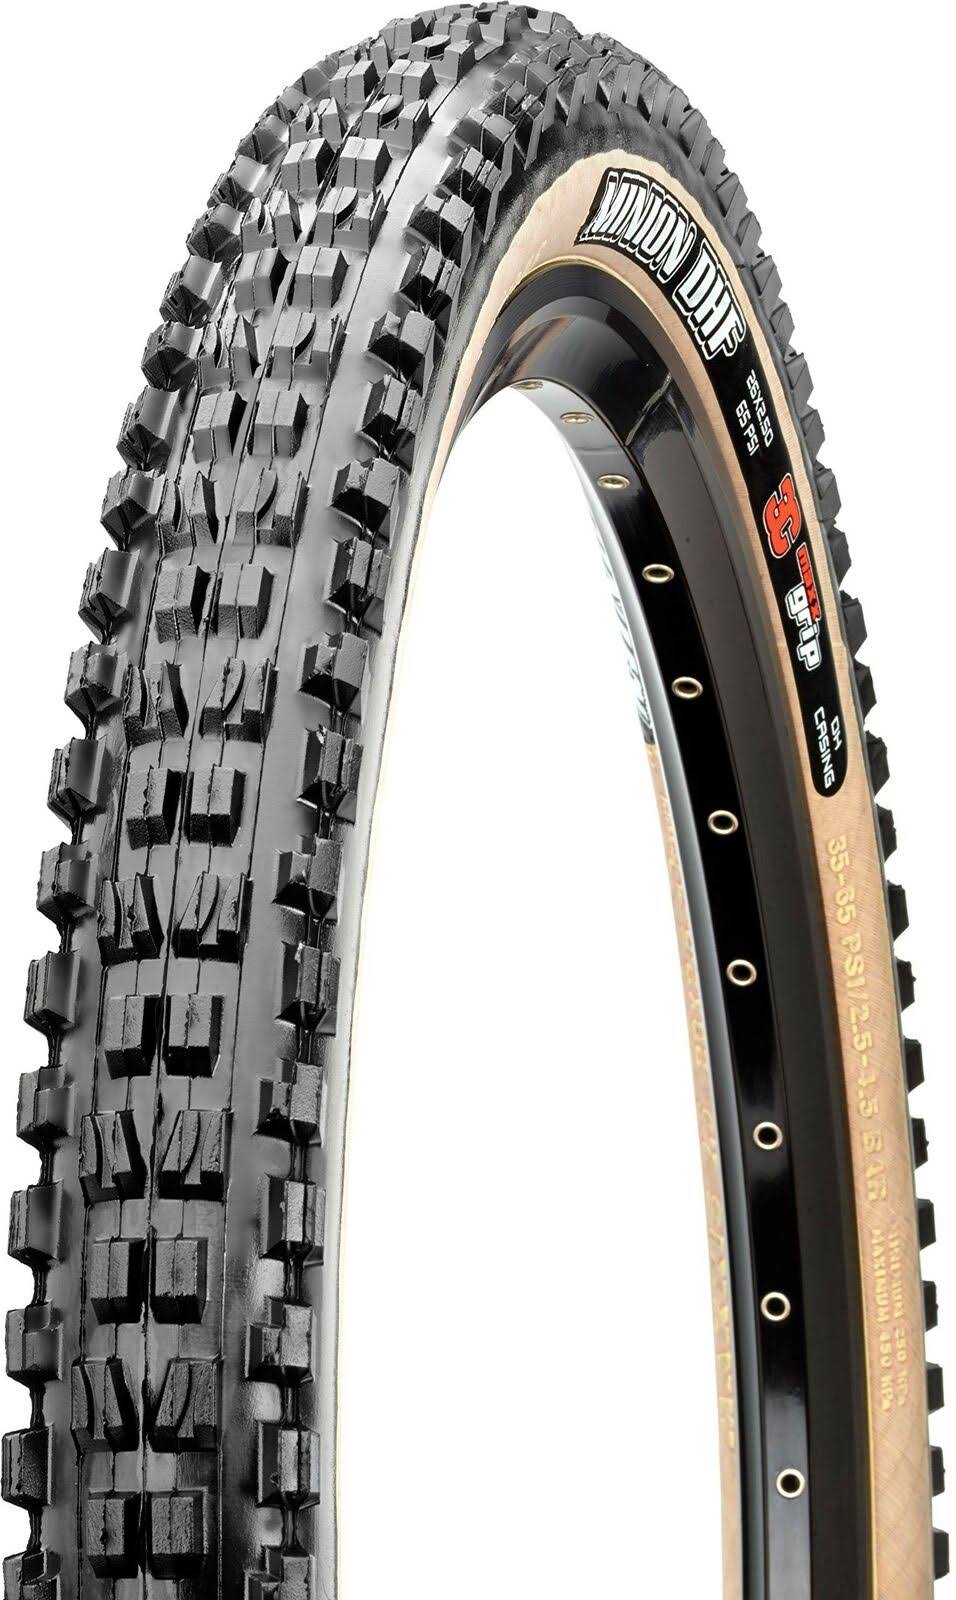 Maxxis Minion Bicycle Tire - 27.5" x 2.30", 60tpi